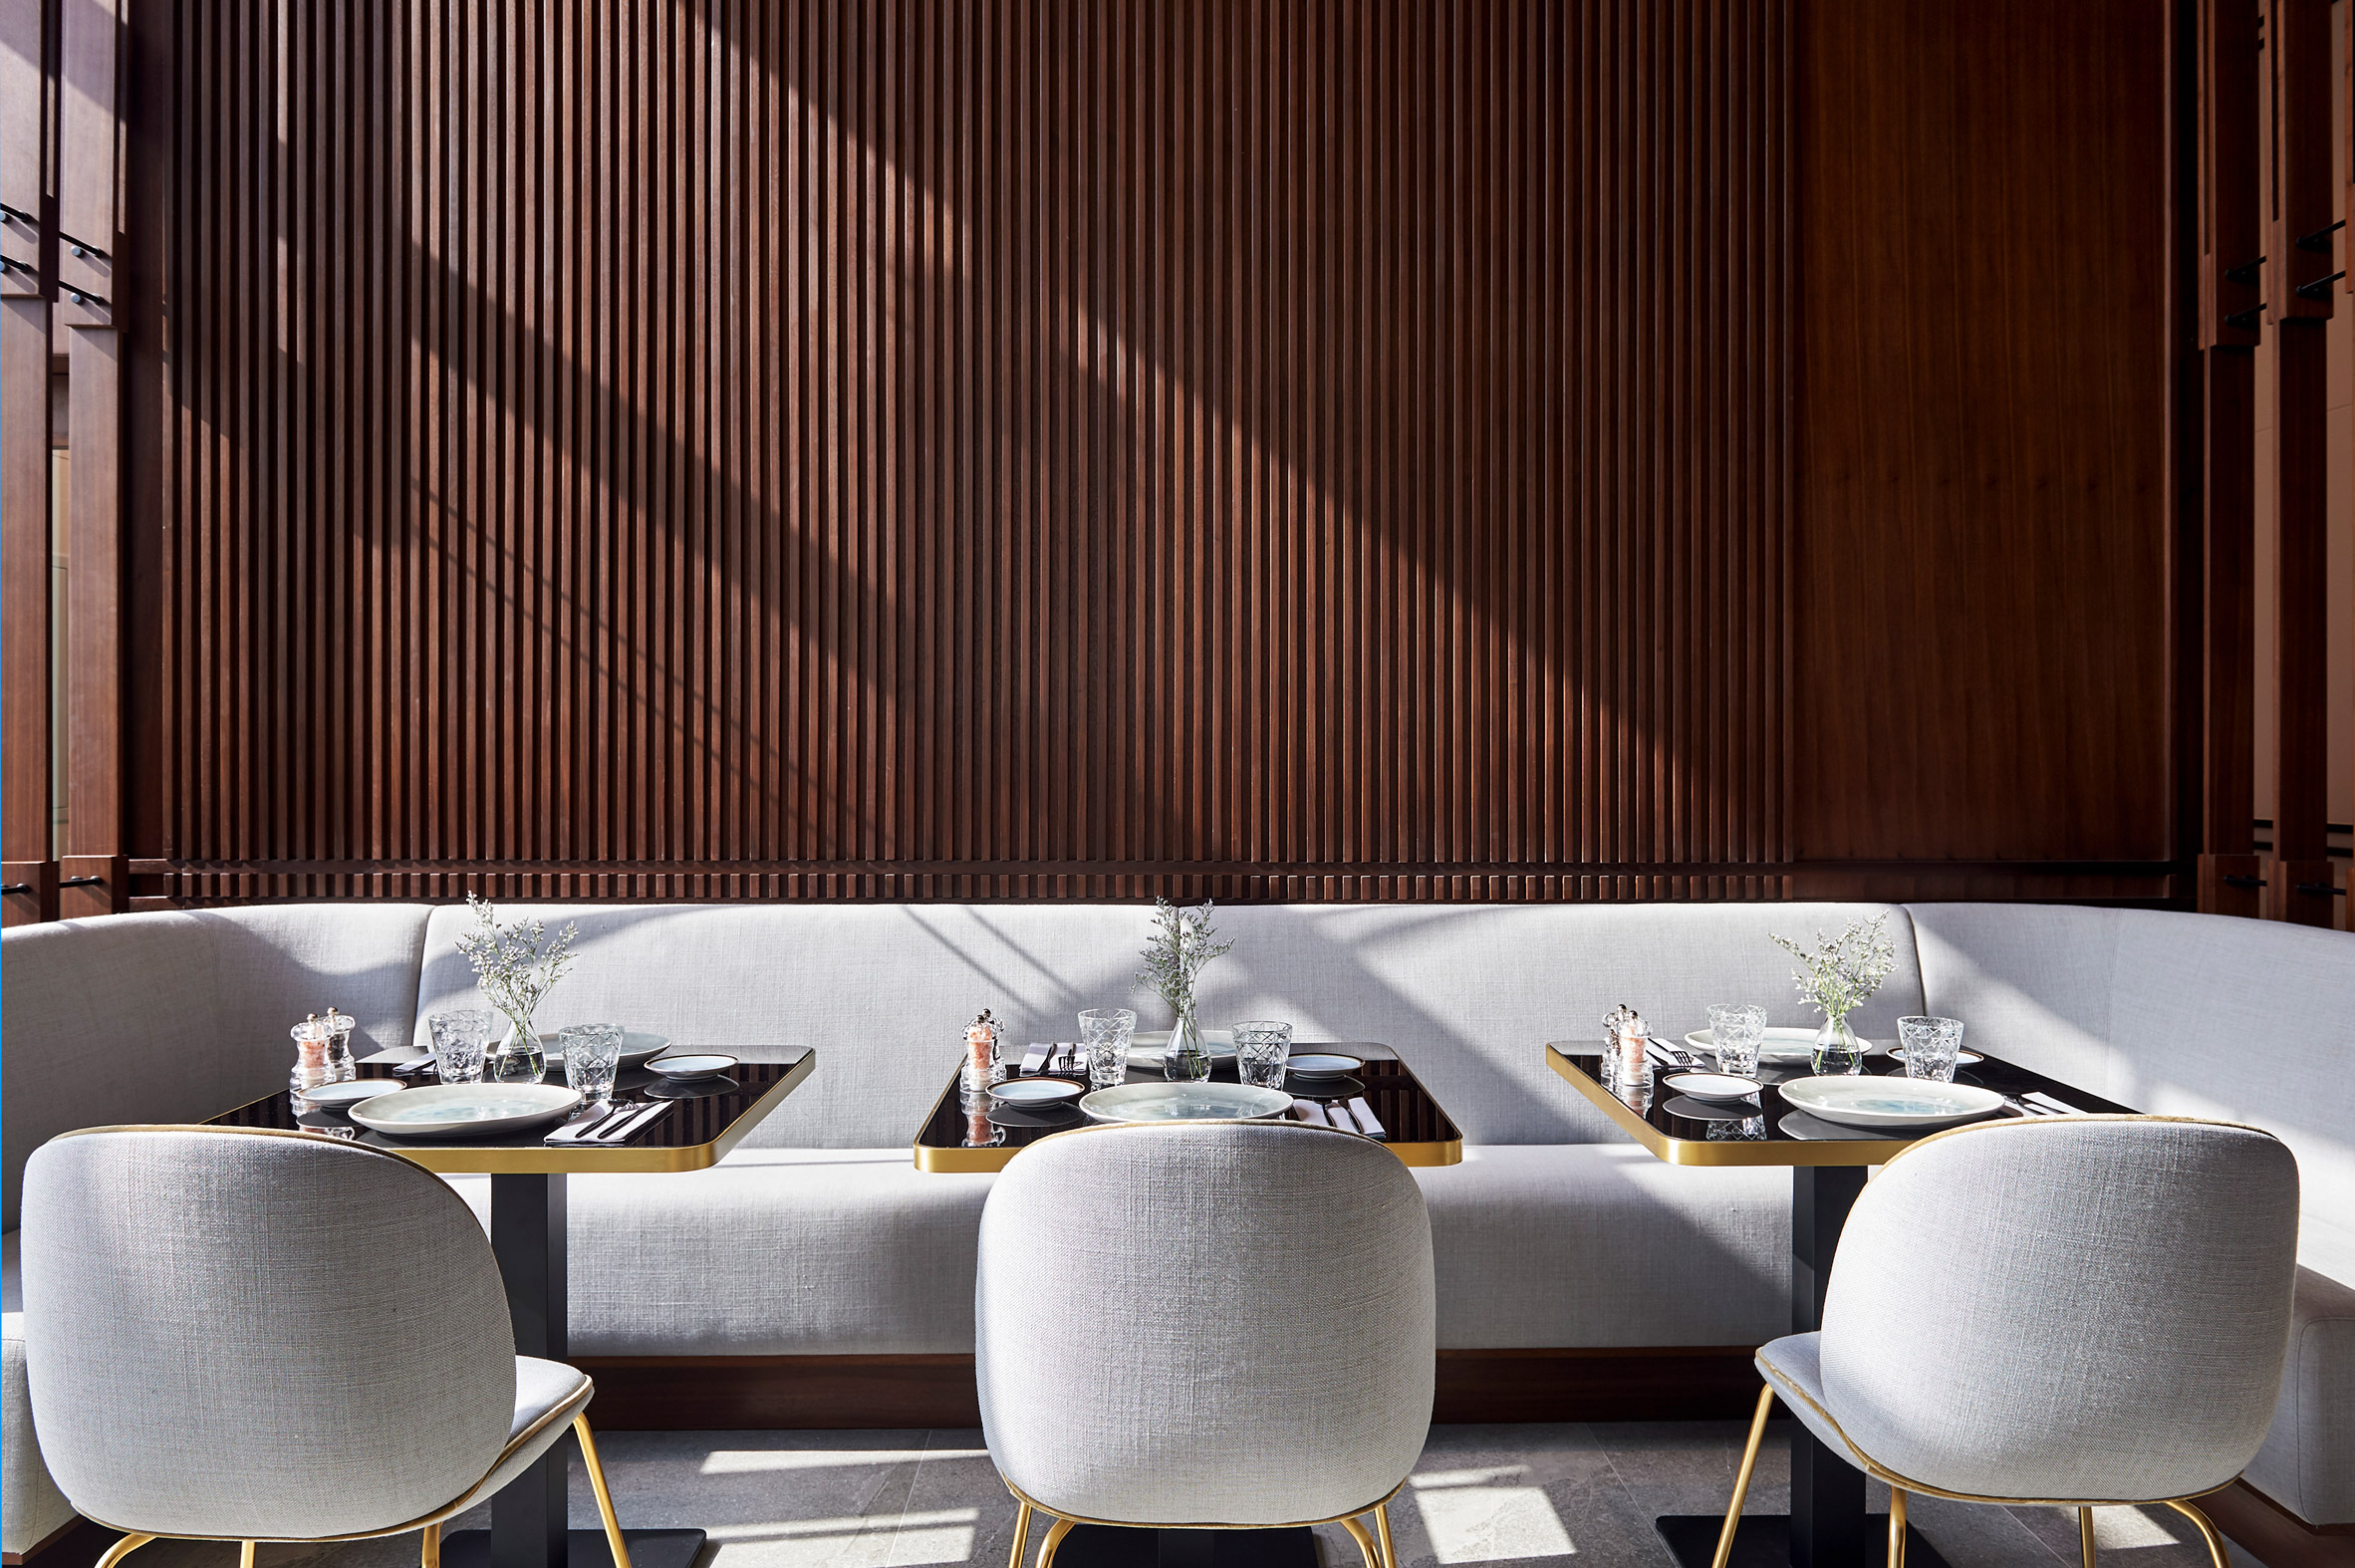 The restaurant at Form Hotel Dubai, which won the Urban Hotel category and was named New Concept of the Year at the AHEAD MEA 2018 hospitality awards